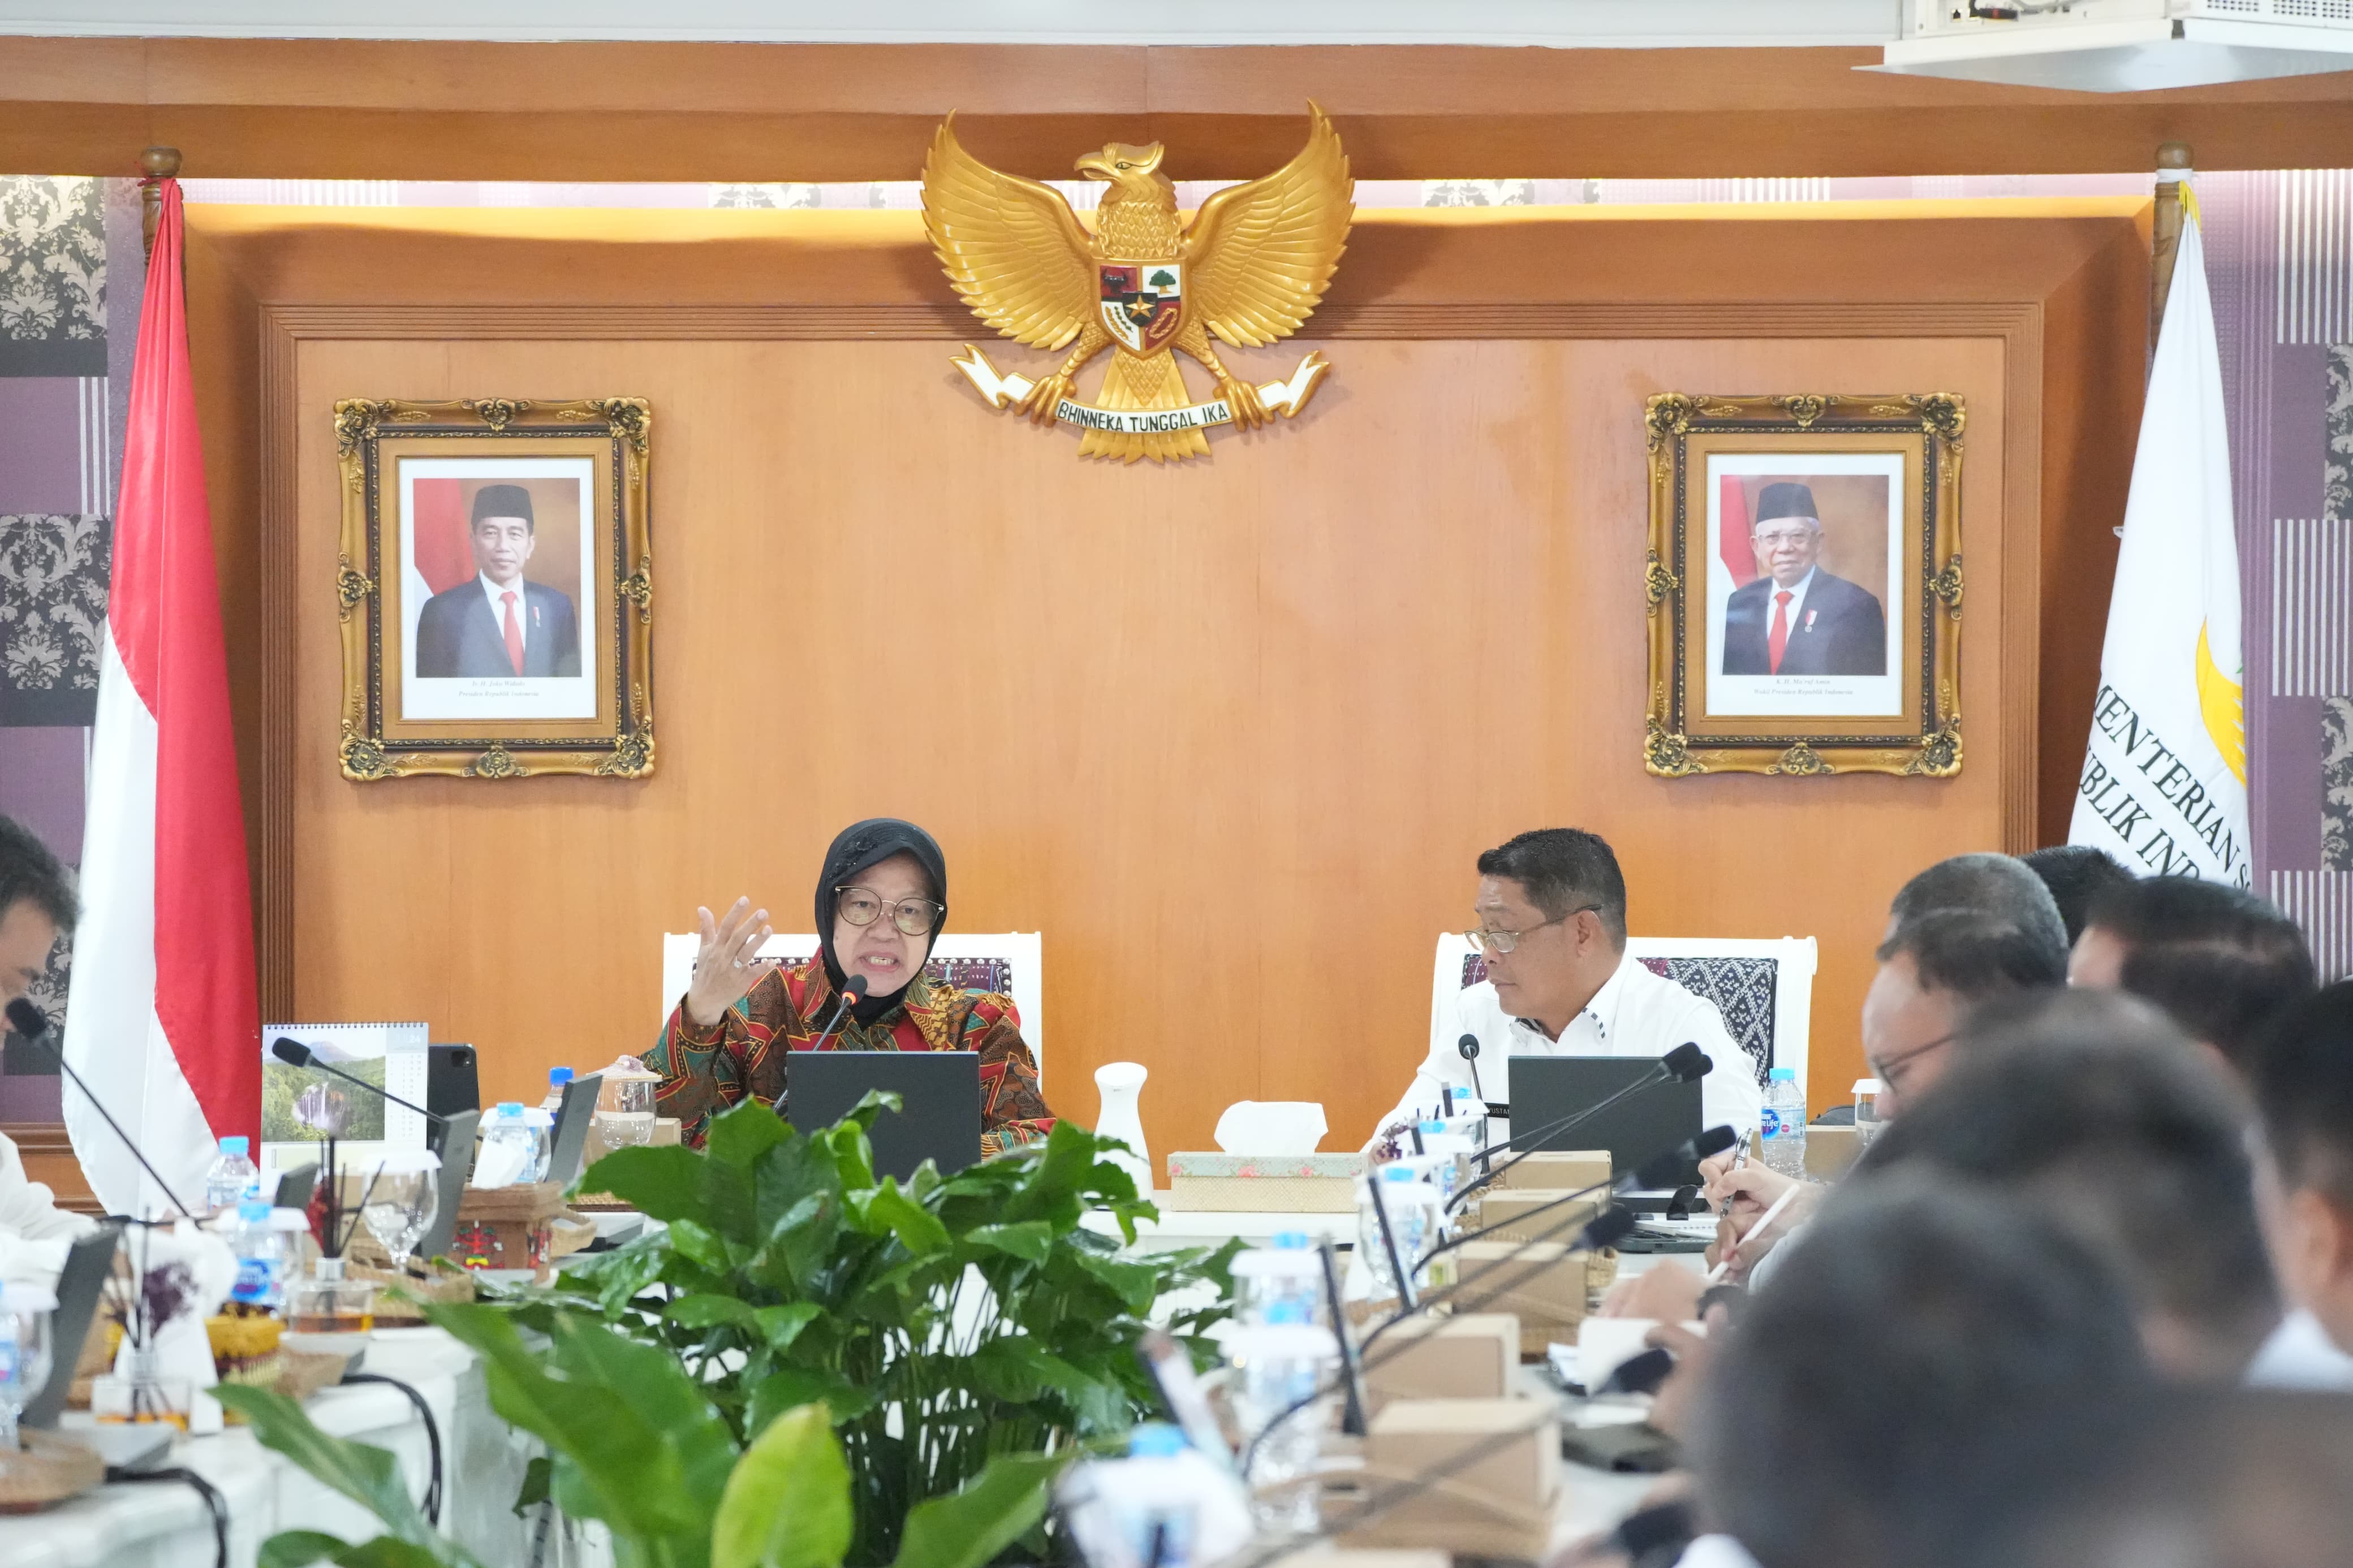 Minister of Social Affairs Risma in the 33rd Regional Police Sespimti III Professional Work Lecture Activity